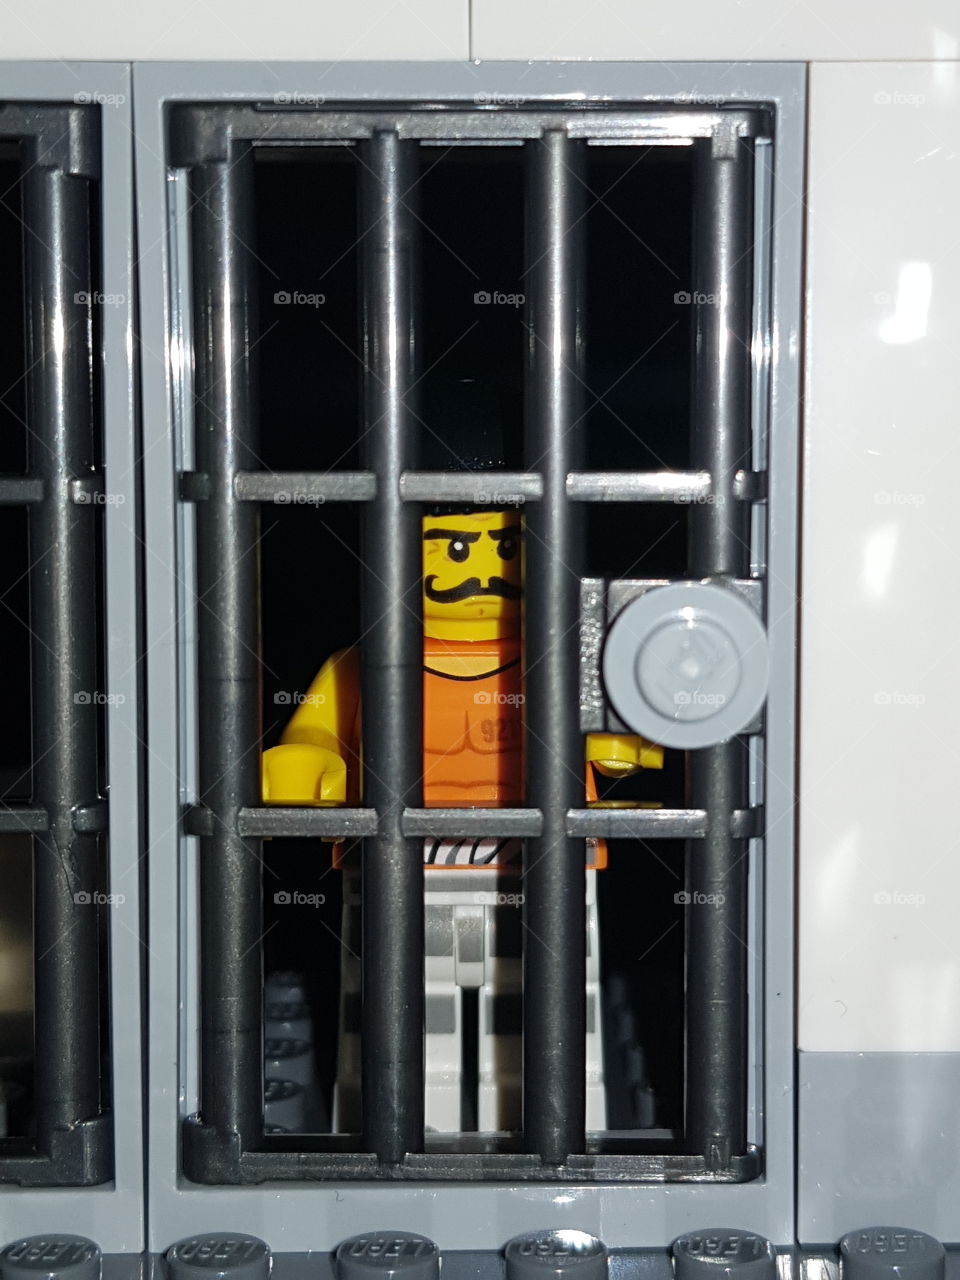 Life behind bars us not worth the time. don't be like Mister Lego man.